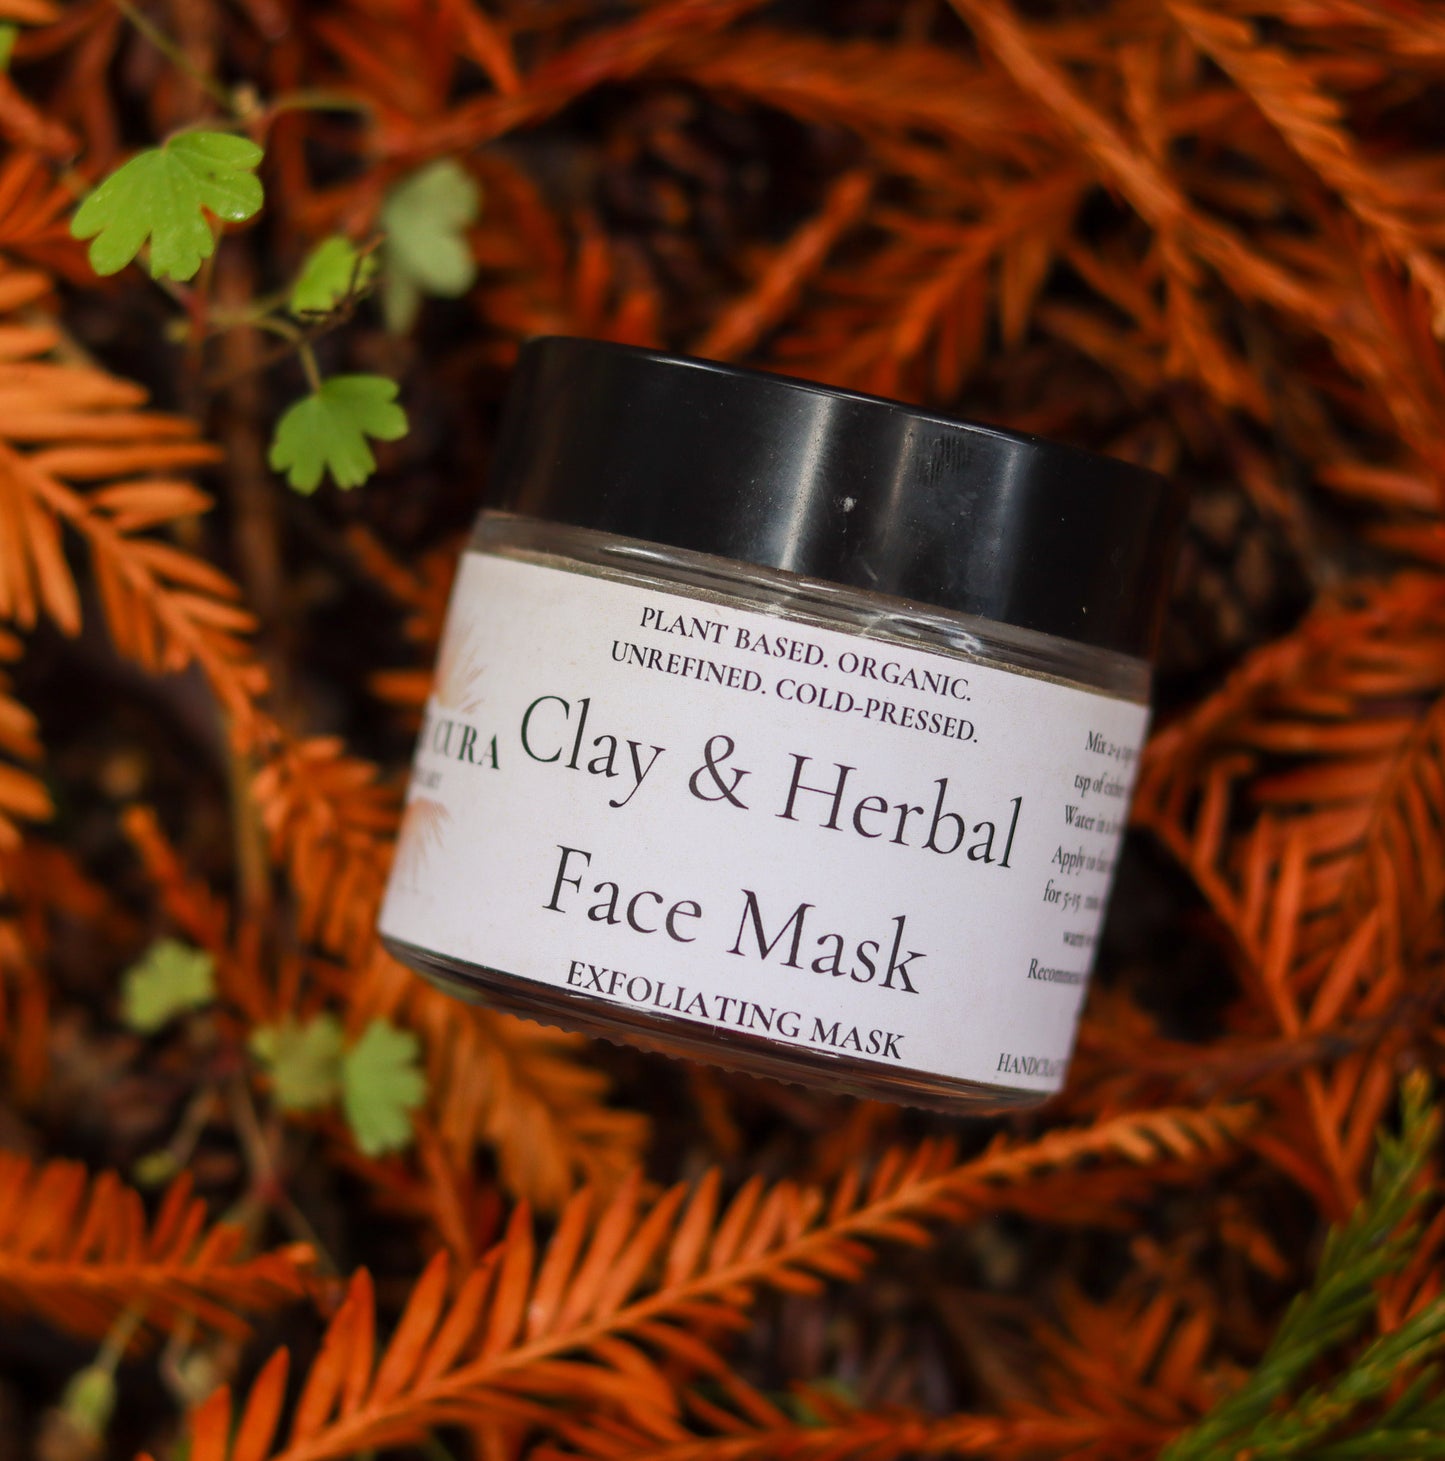 HERBS & CLAY FACE MASK - Exfoliating, Detoxing, Cleansing